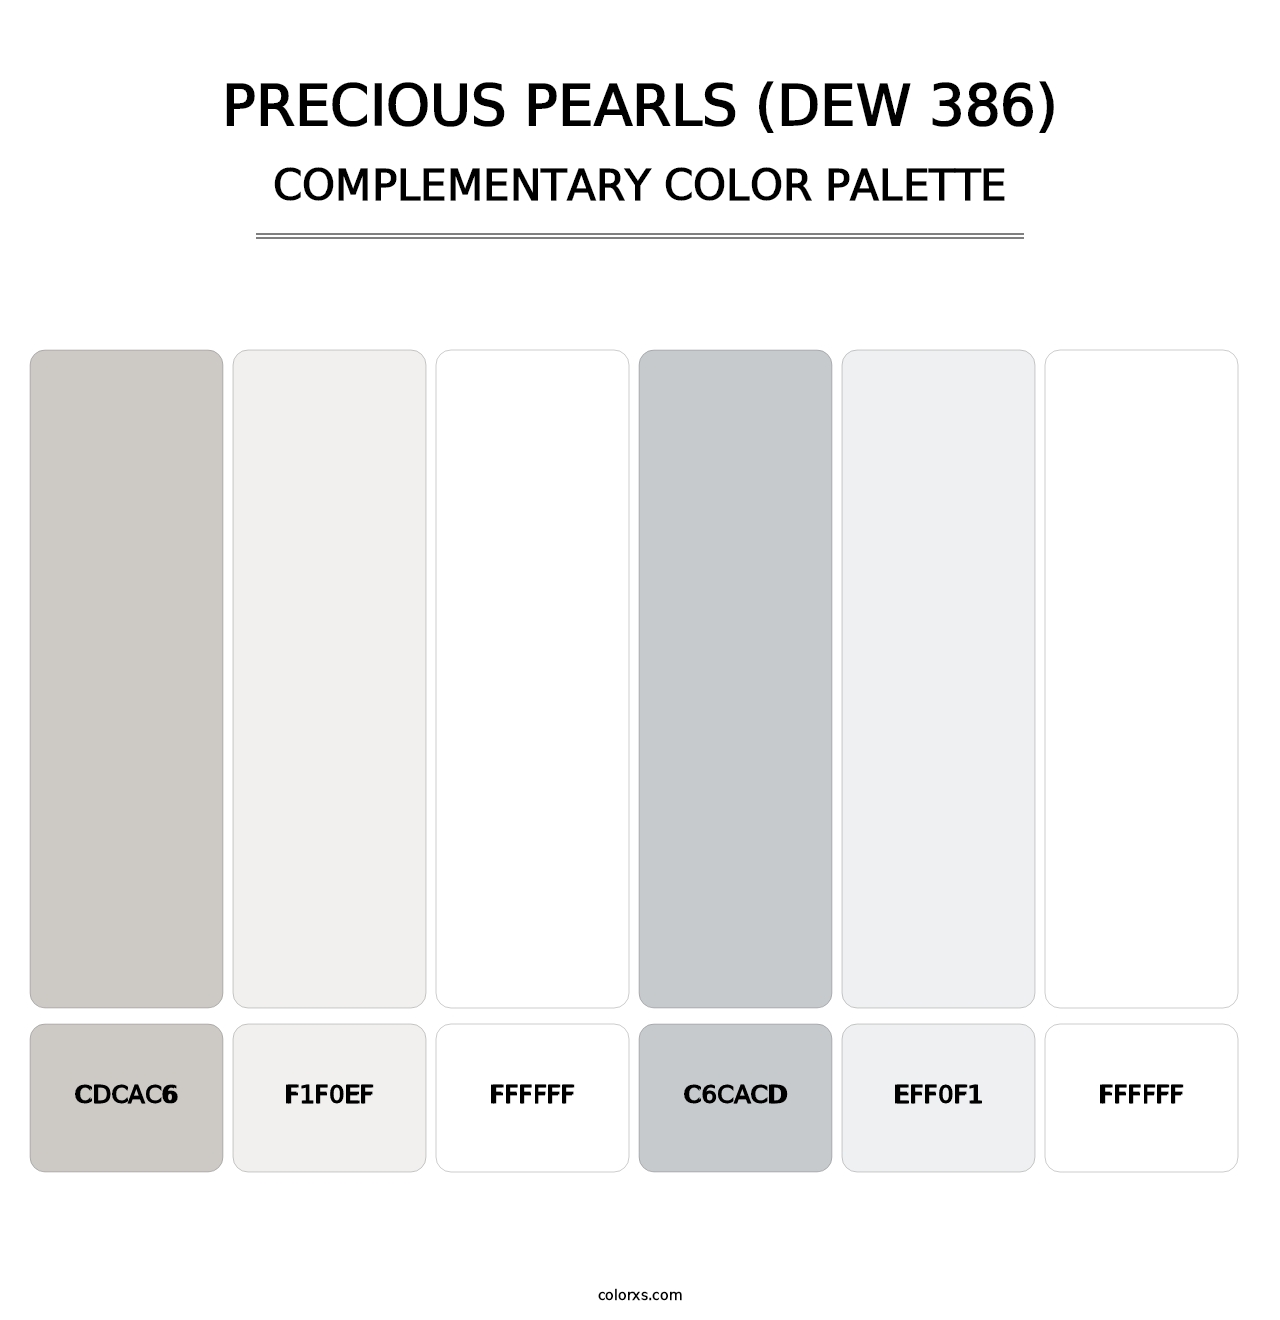 Precious Pearls (DEW 386) - Complementary Color Palette